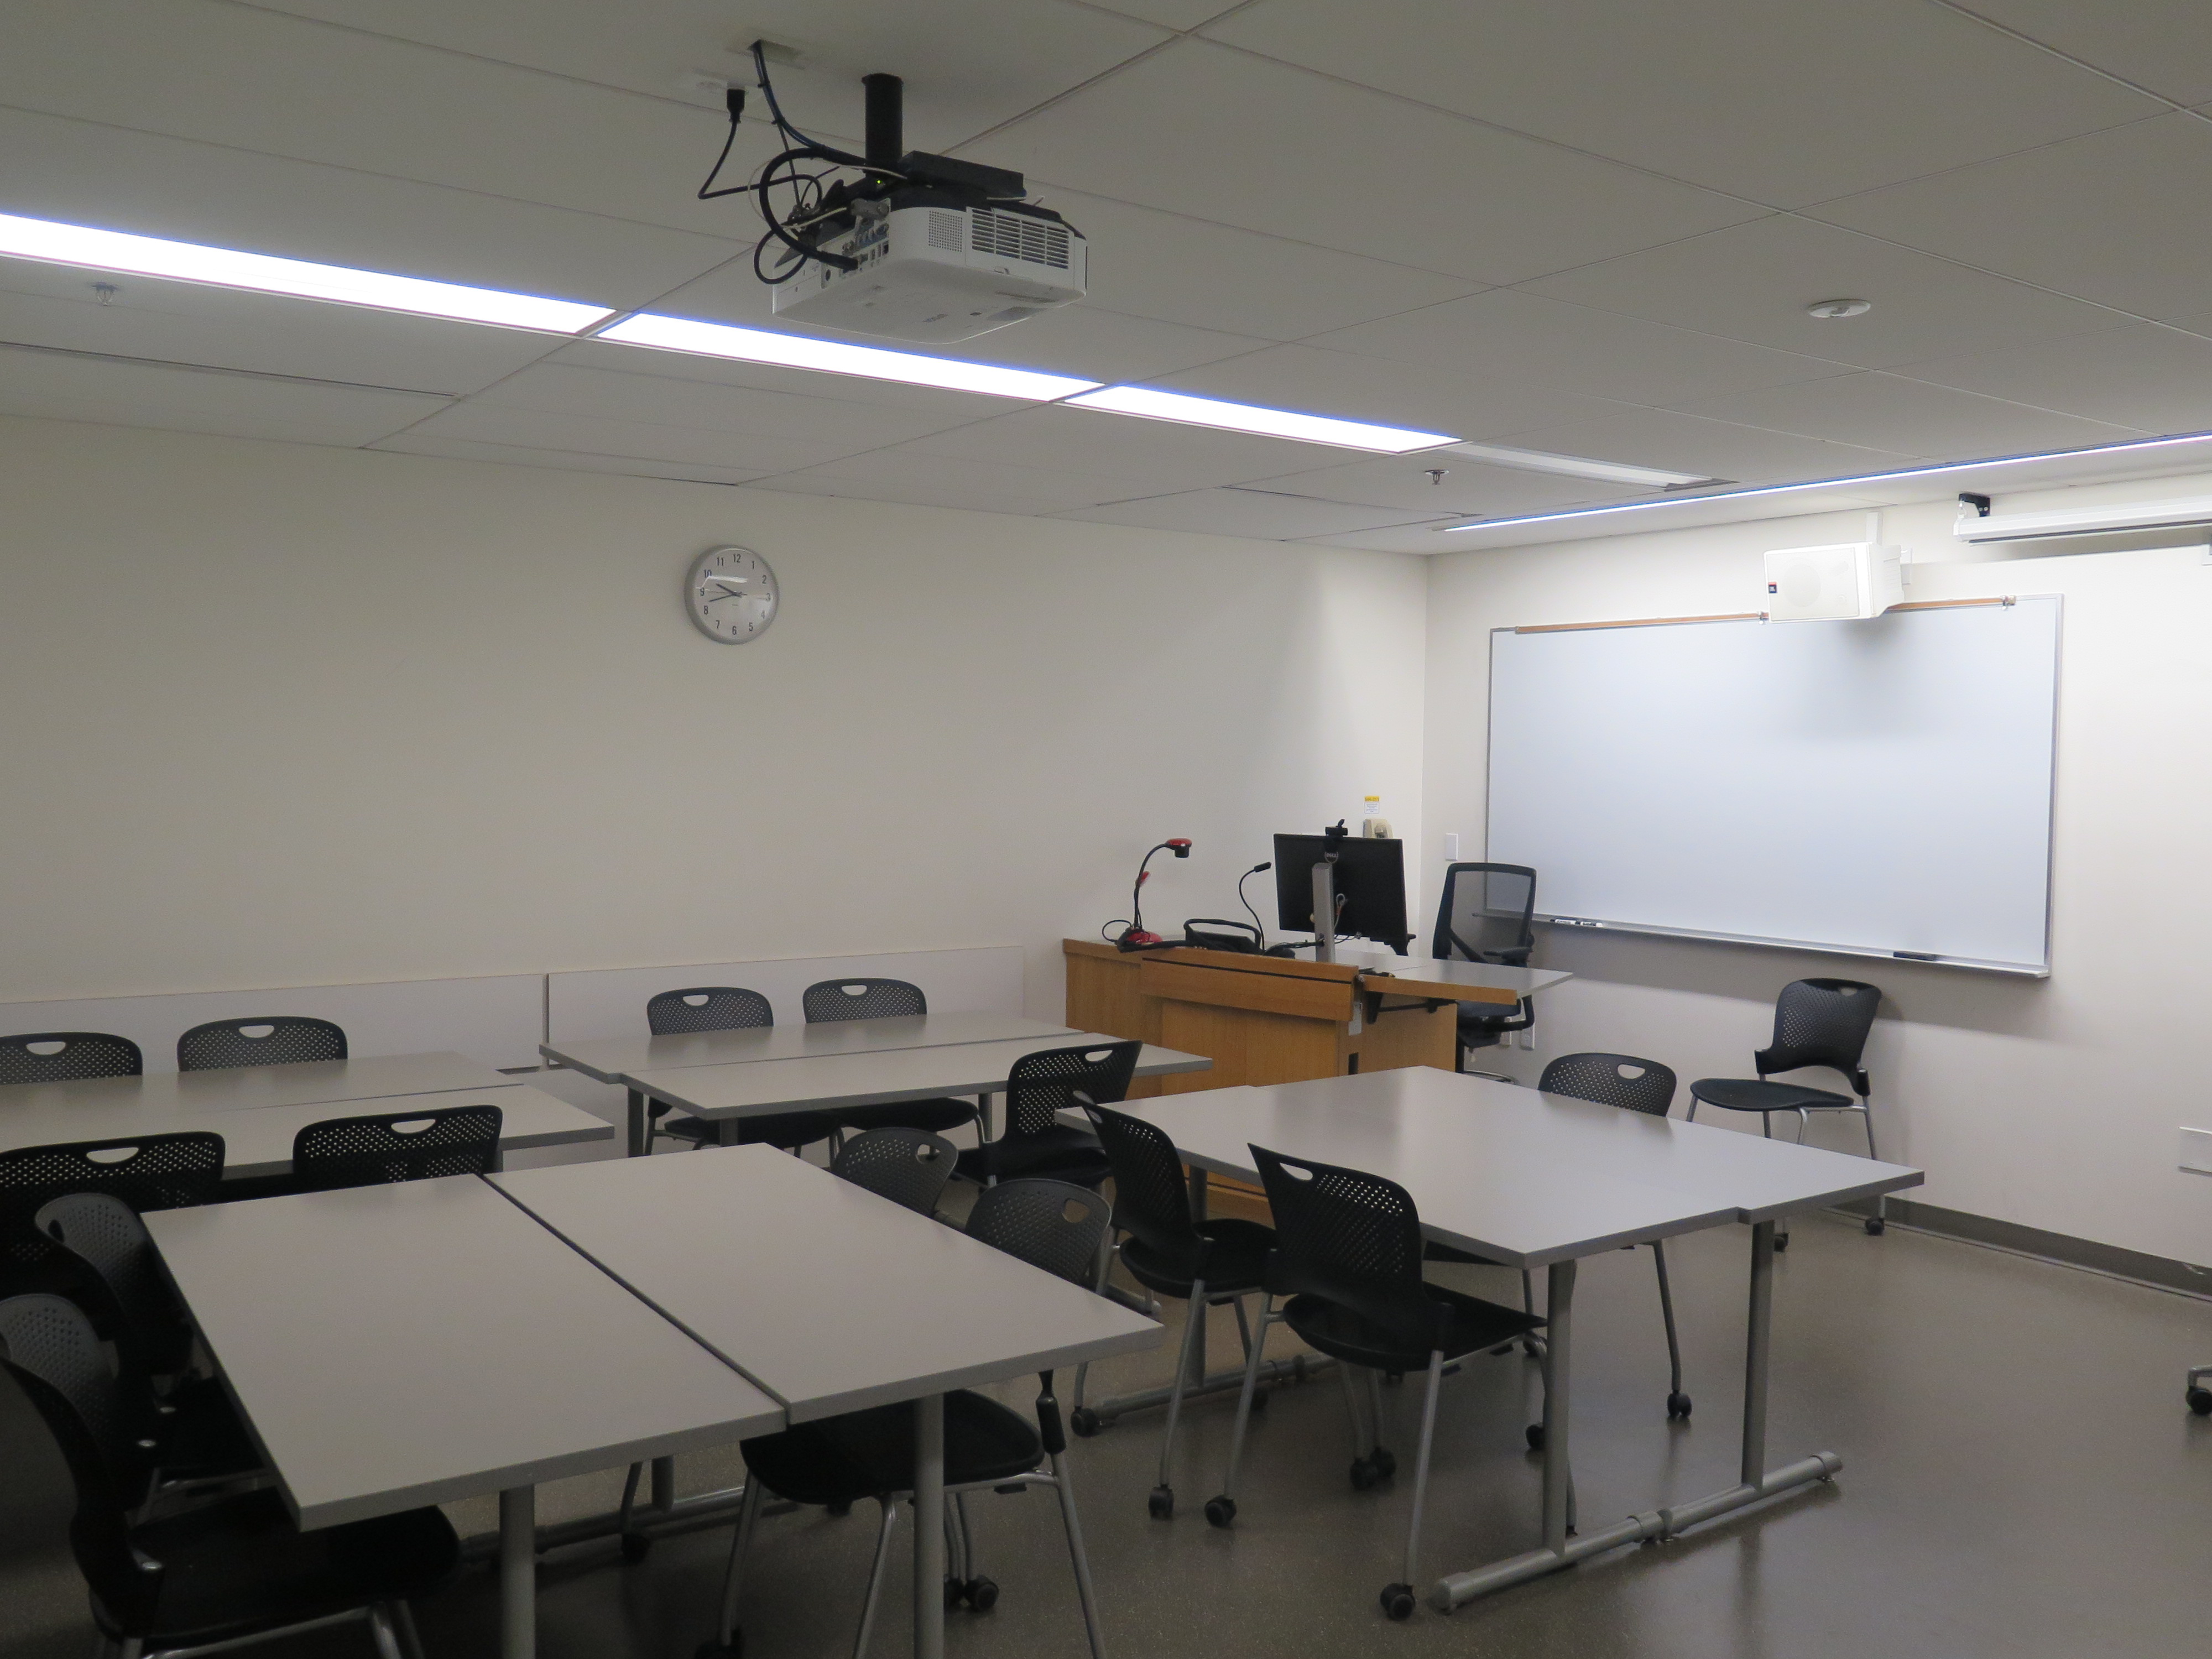 Room Consists of hard floors, moveable tables and chairs, a white board and podium are both located at the front of the room.